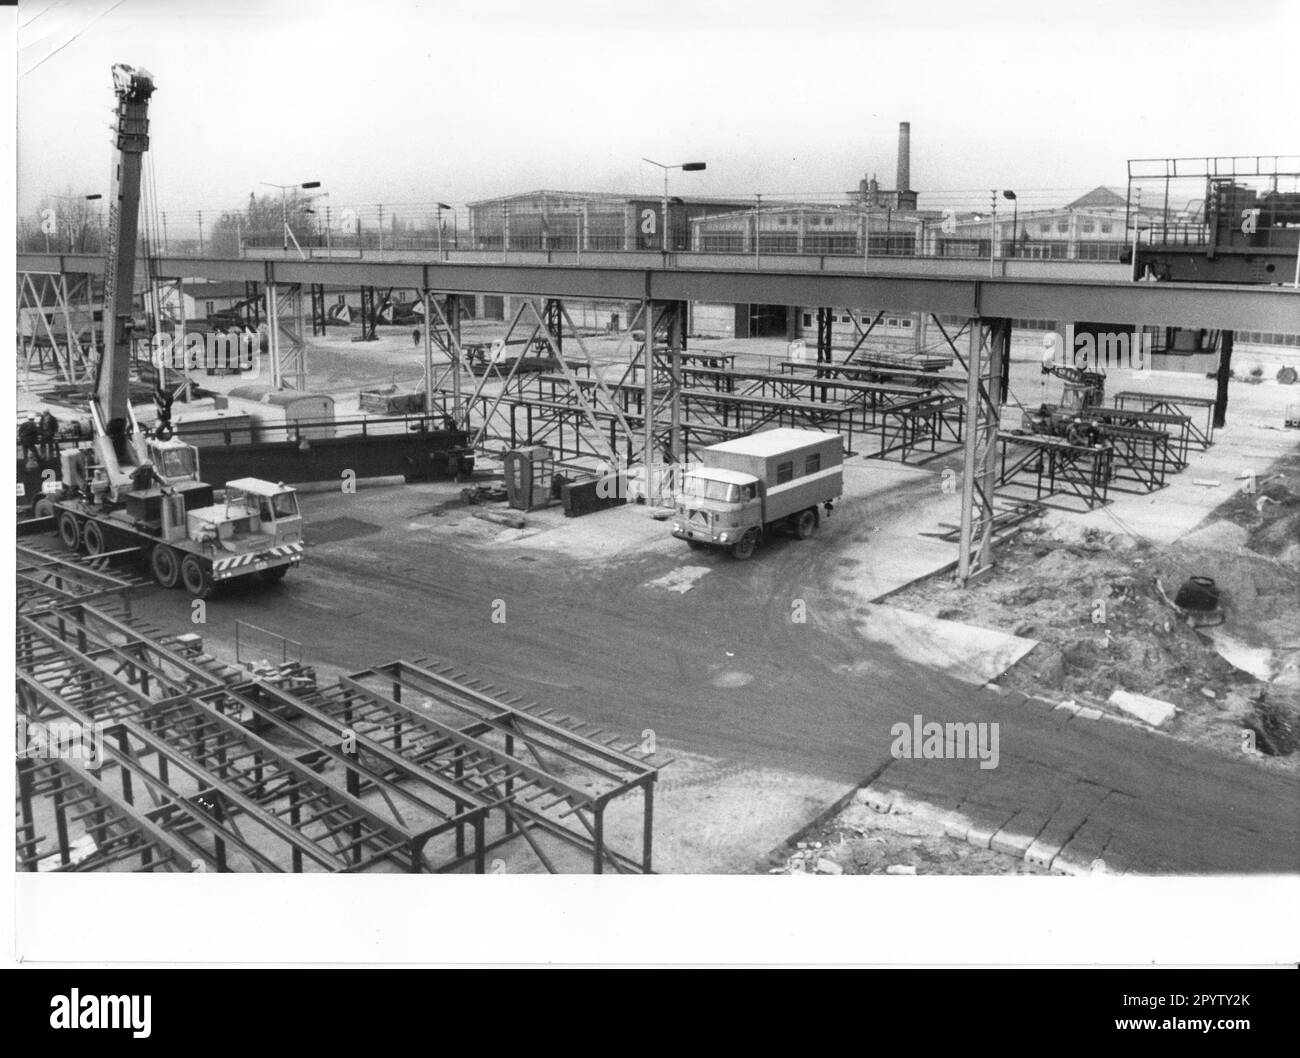 Production of wall and ceiling panels for housing construction. Prestressed concrete slabs. Exterior view of the Wohnungsbaukombinat (WBK) Brandenburg panel plant. Plant. GDR. historical. Photo: Bruno Wernitz, 10.11.1976 [automated translation] Stock Photo